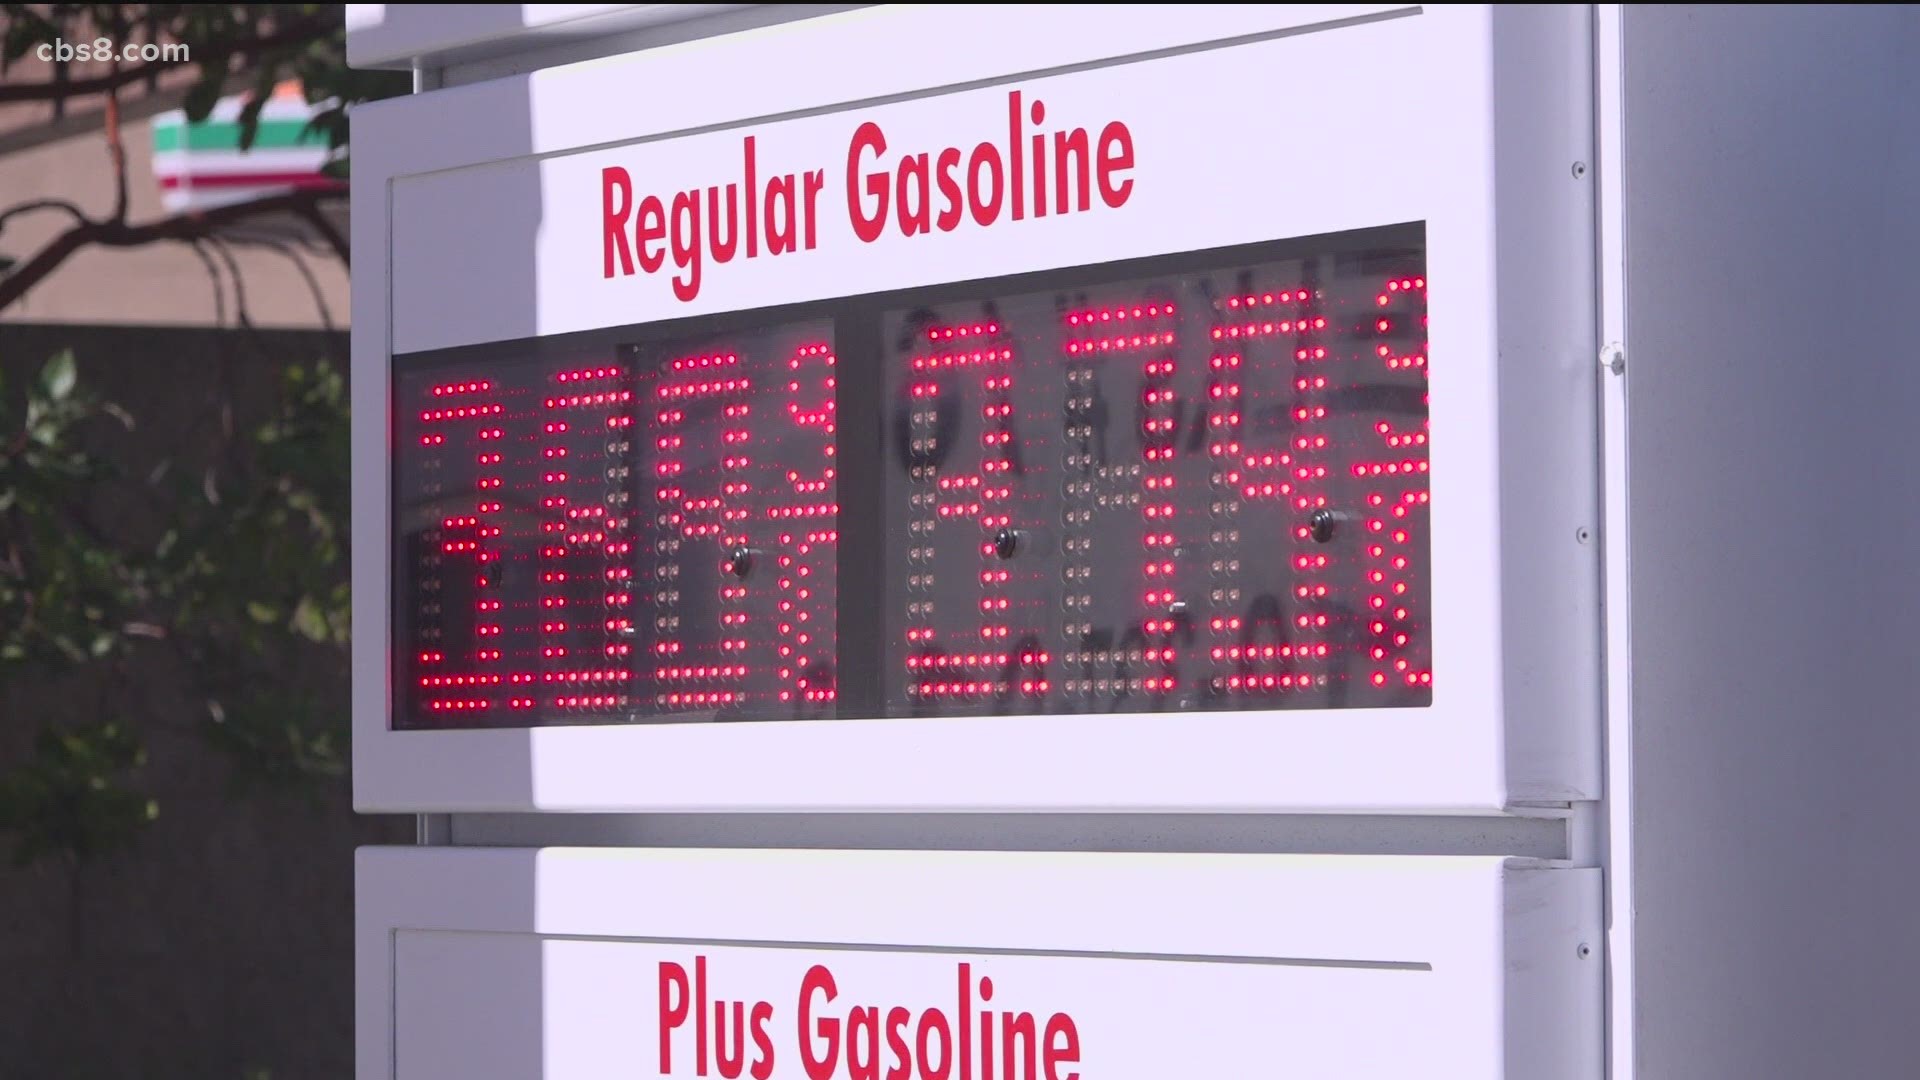 According to the Automobile Club of Southern California, gas prices in San Diego county have gone up 31 of the past 32 days.